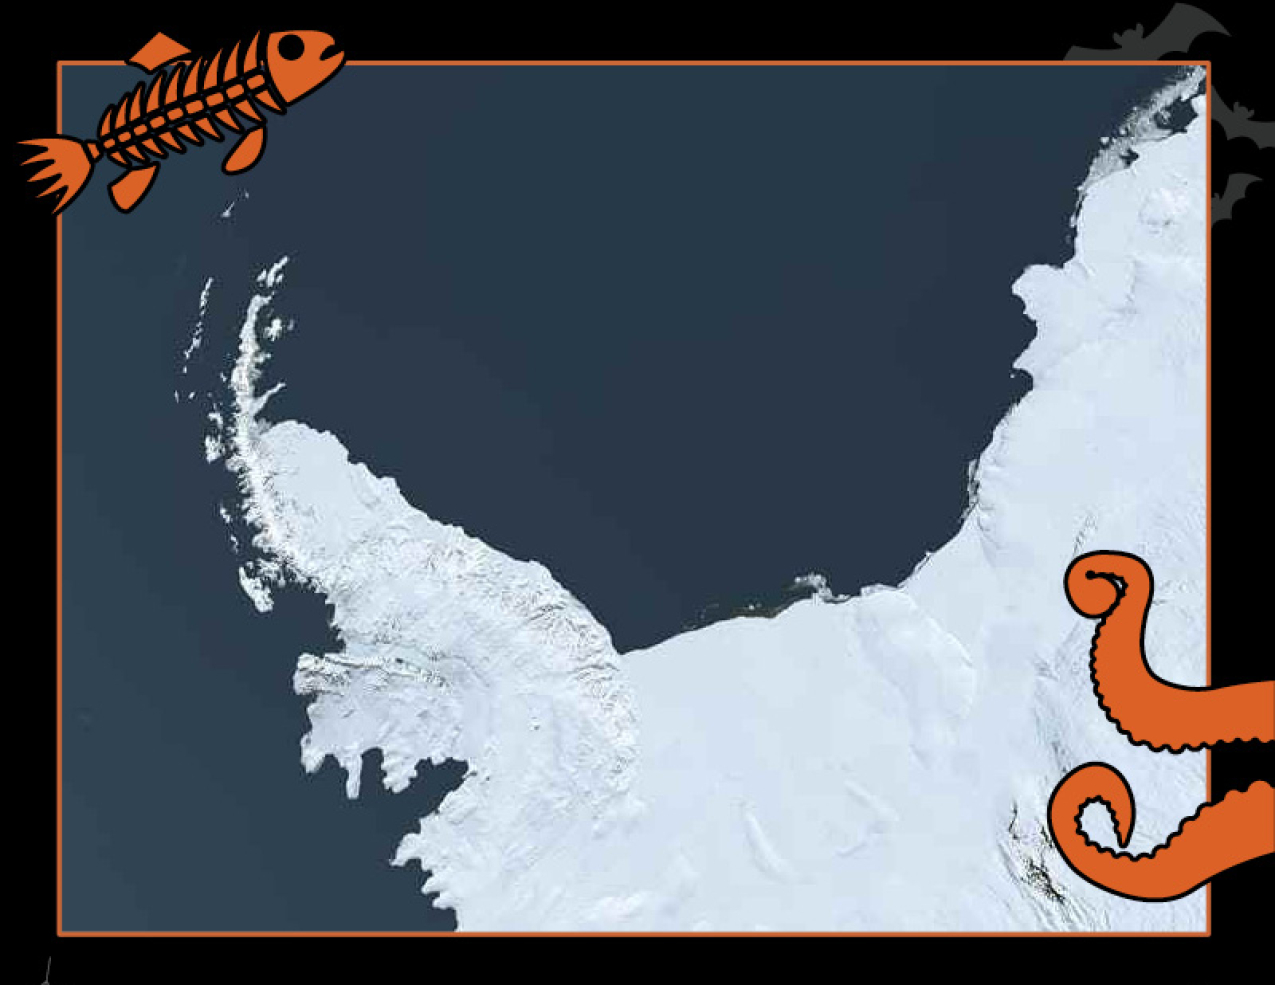 Satellite image of the tip of Antarctica. Border of the photo is black with orange sea creature graphics of octopus tentacles and a fish skeleton. Text: What is the “Bloop?” #NOAASpookyScience with NOAA logo.